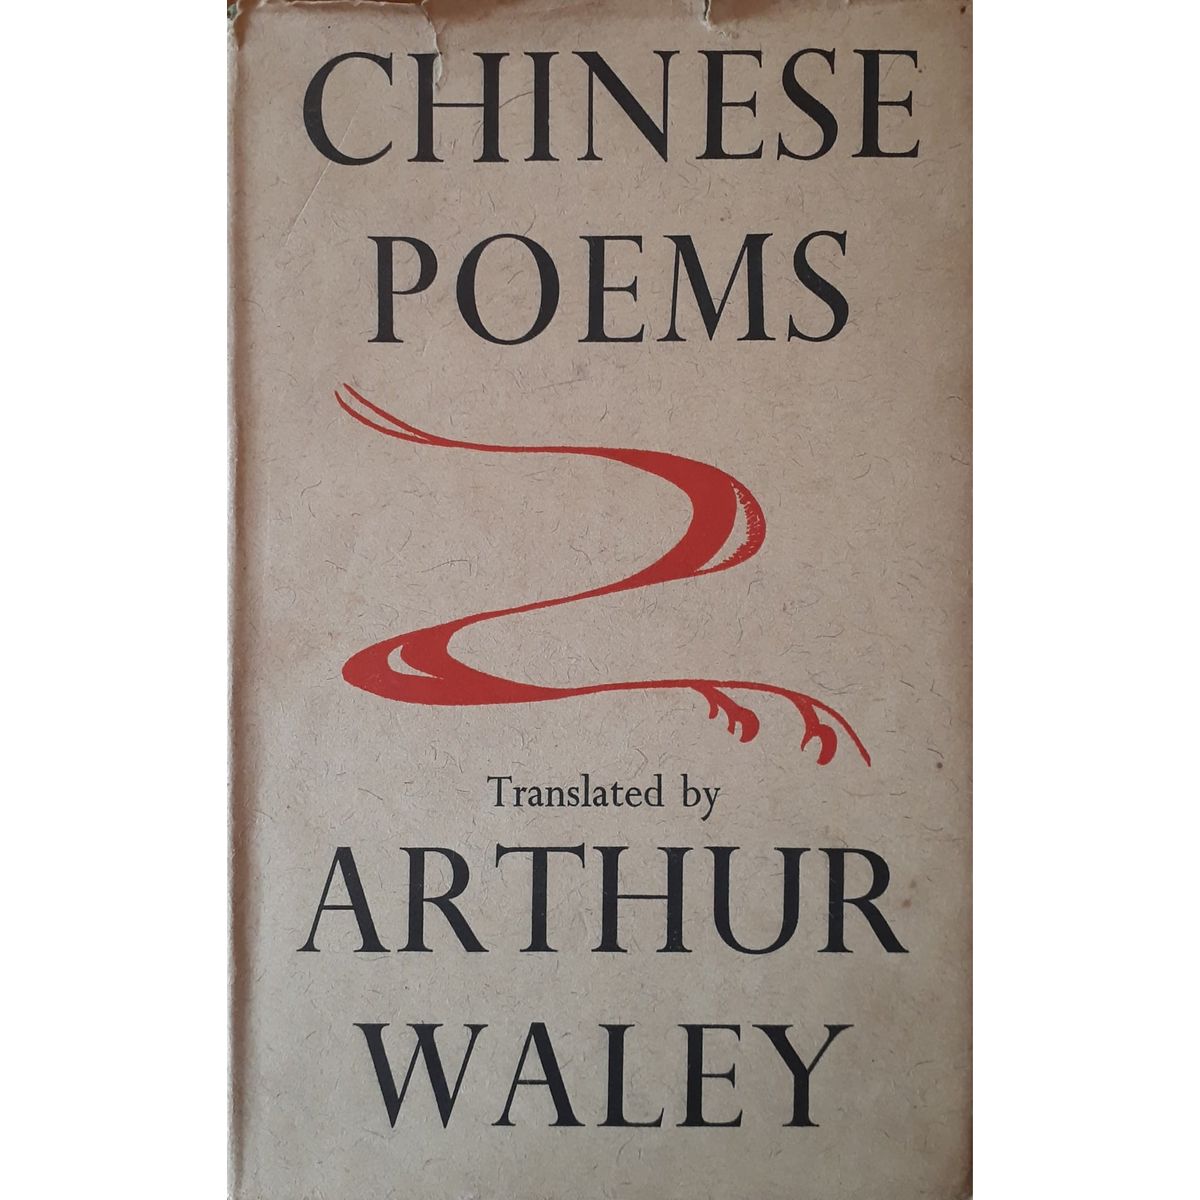 Chinese Poems translated by Arthur Waley, 3rd Impression [1956]